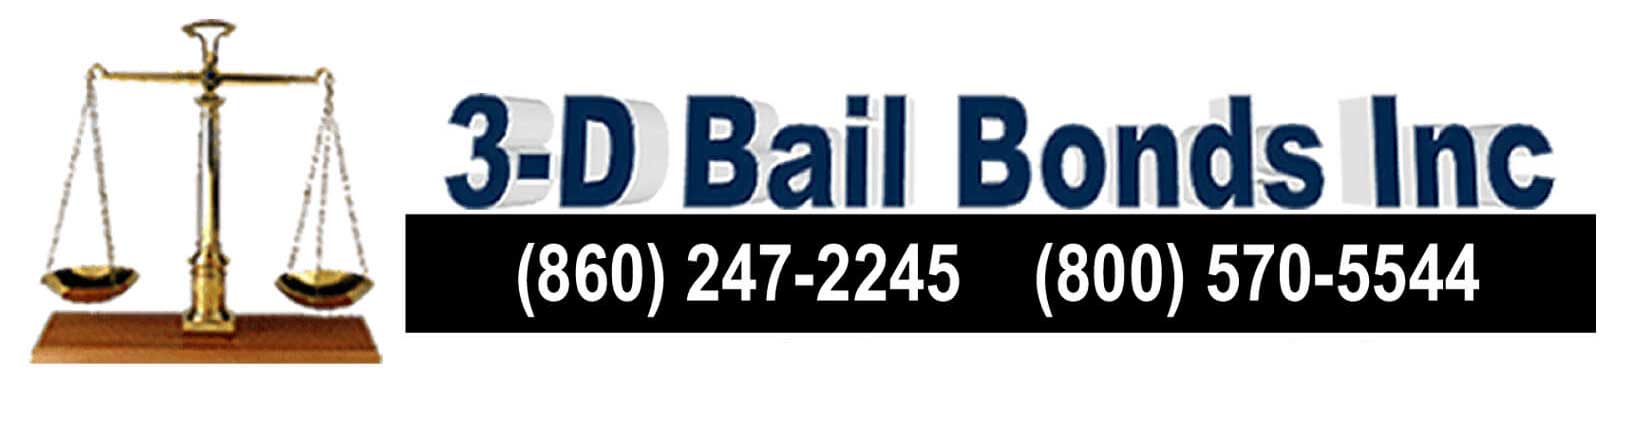 What Is The Cost Of A $100,000 Bail Bond? - Know How To Qualify